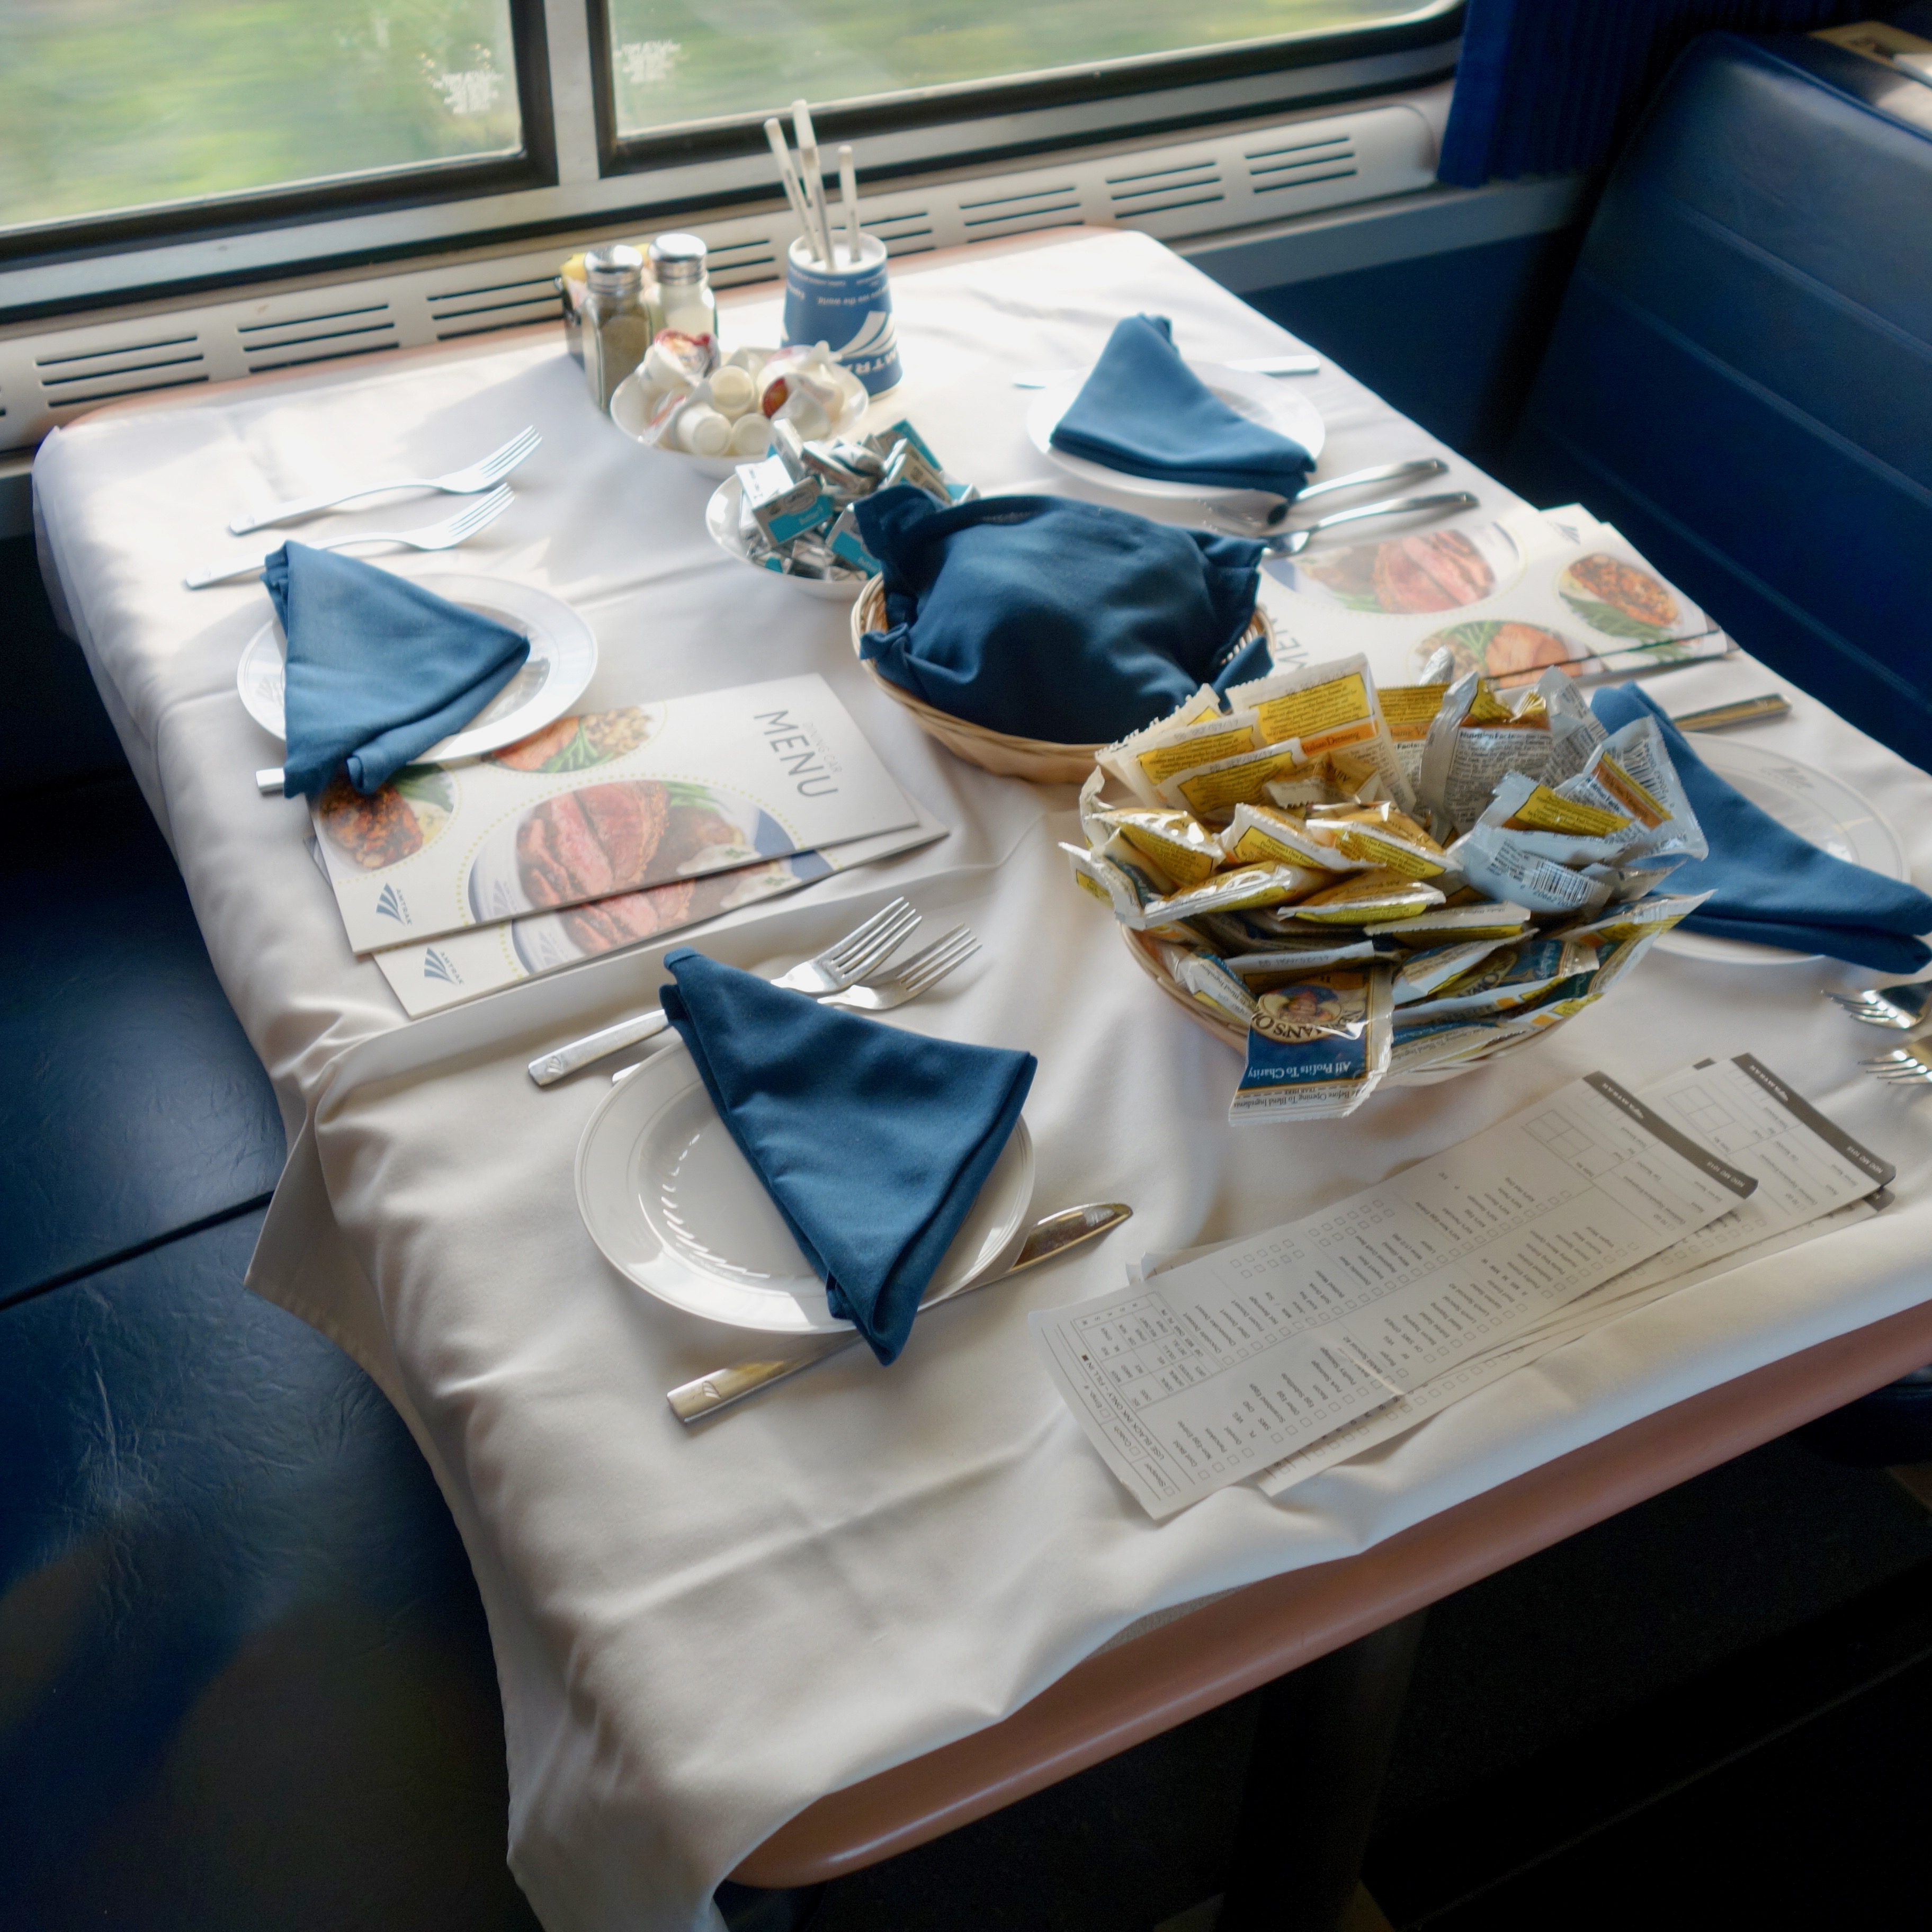 Amtrak Dining Car experience aboard the Empire Builder between Seattle and Chicago. 